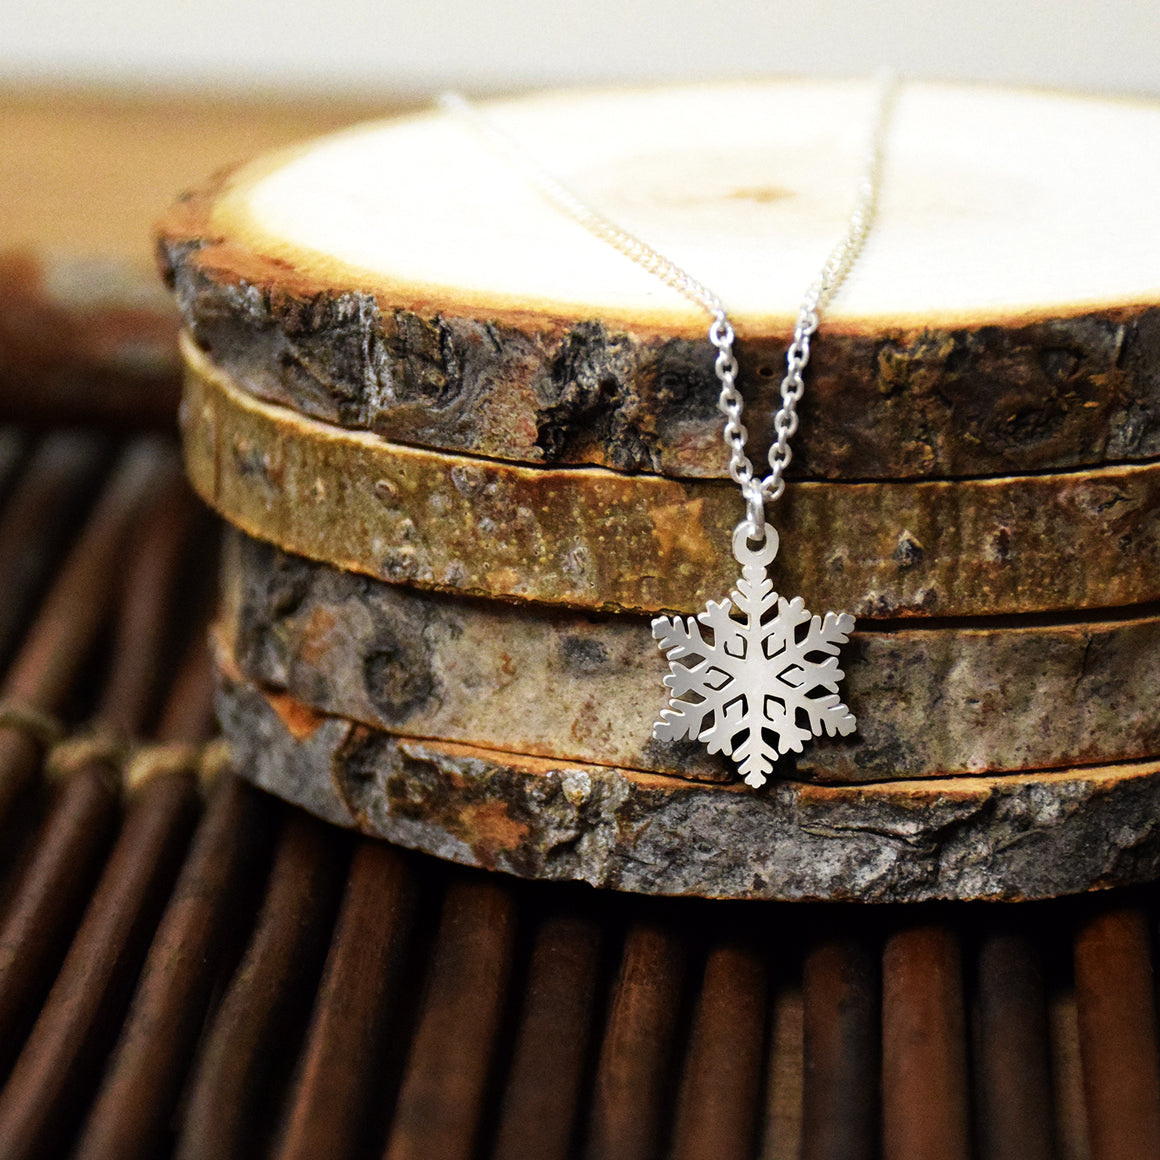 Kindness Dainty Snowflake Necklace - Silver finish